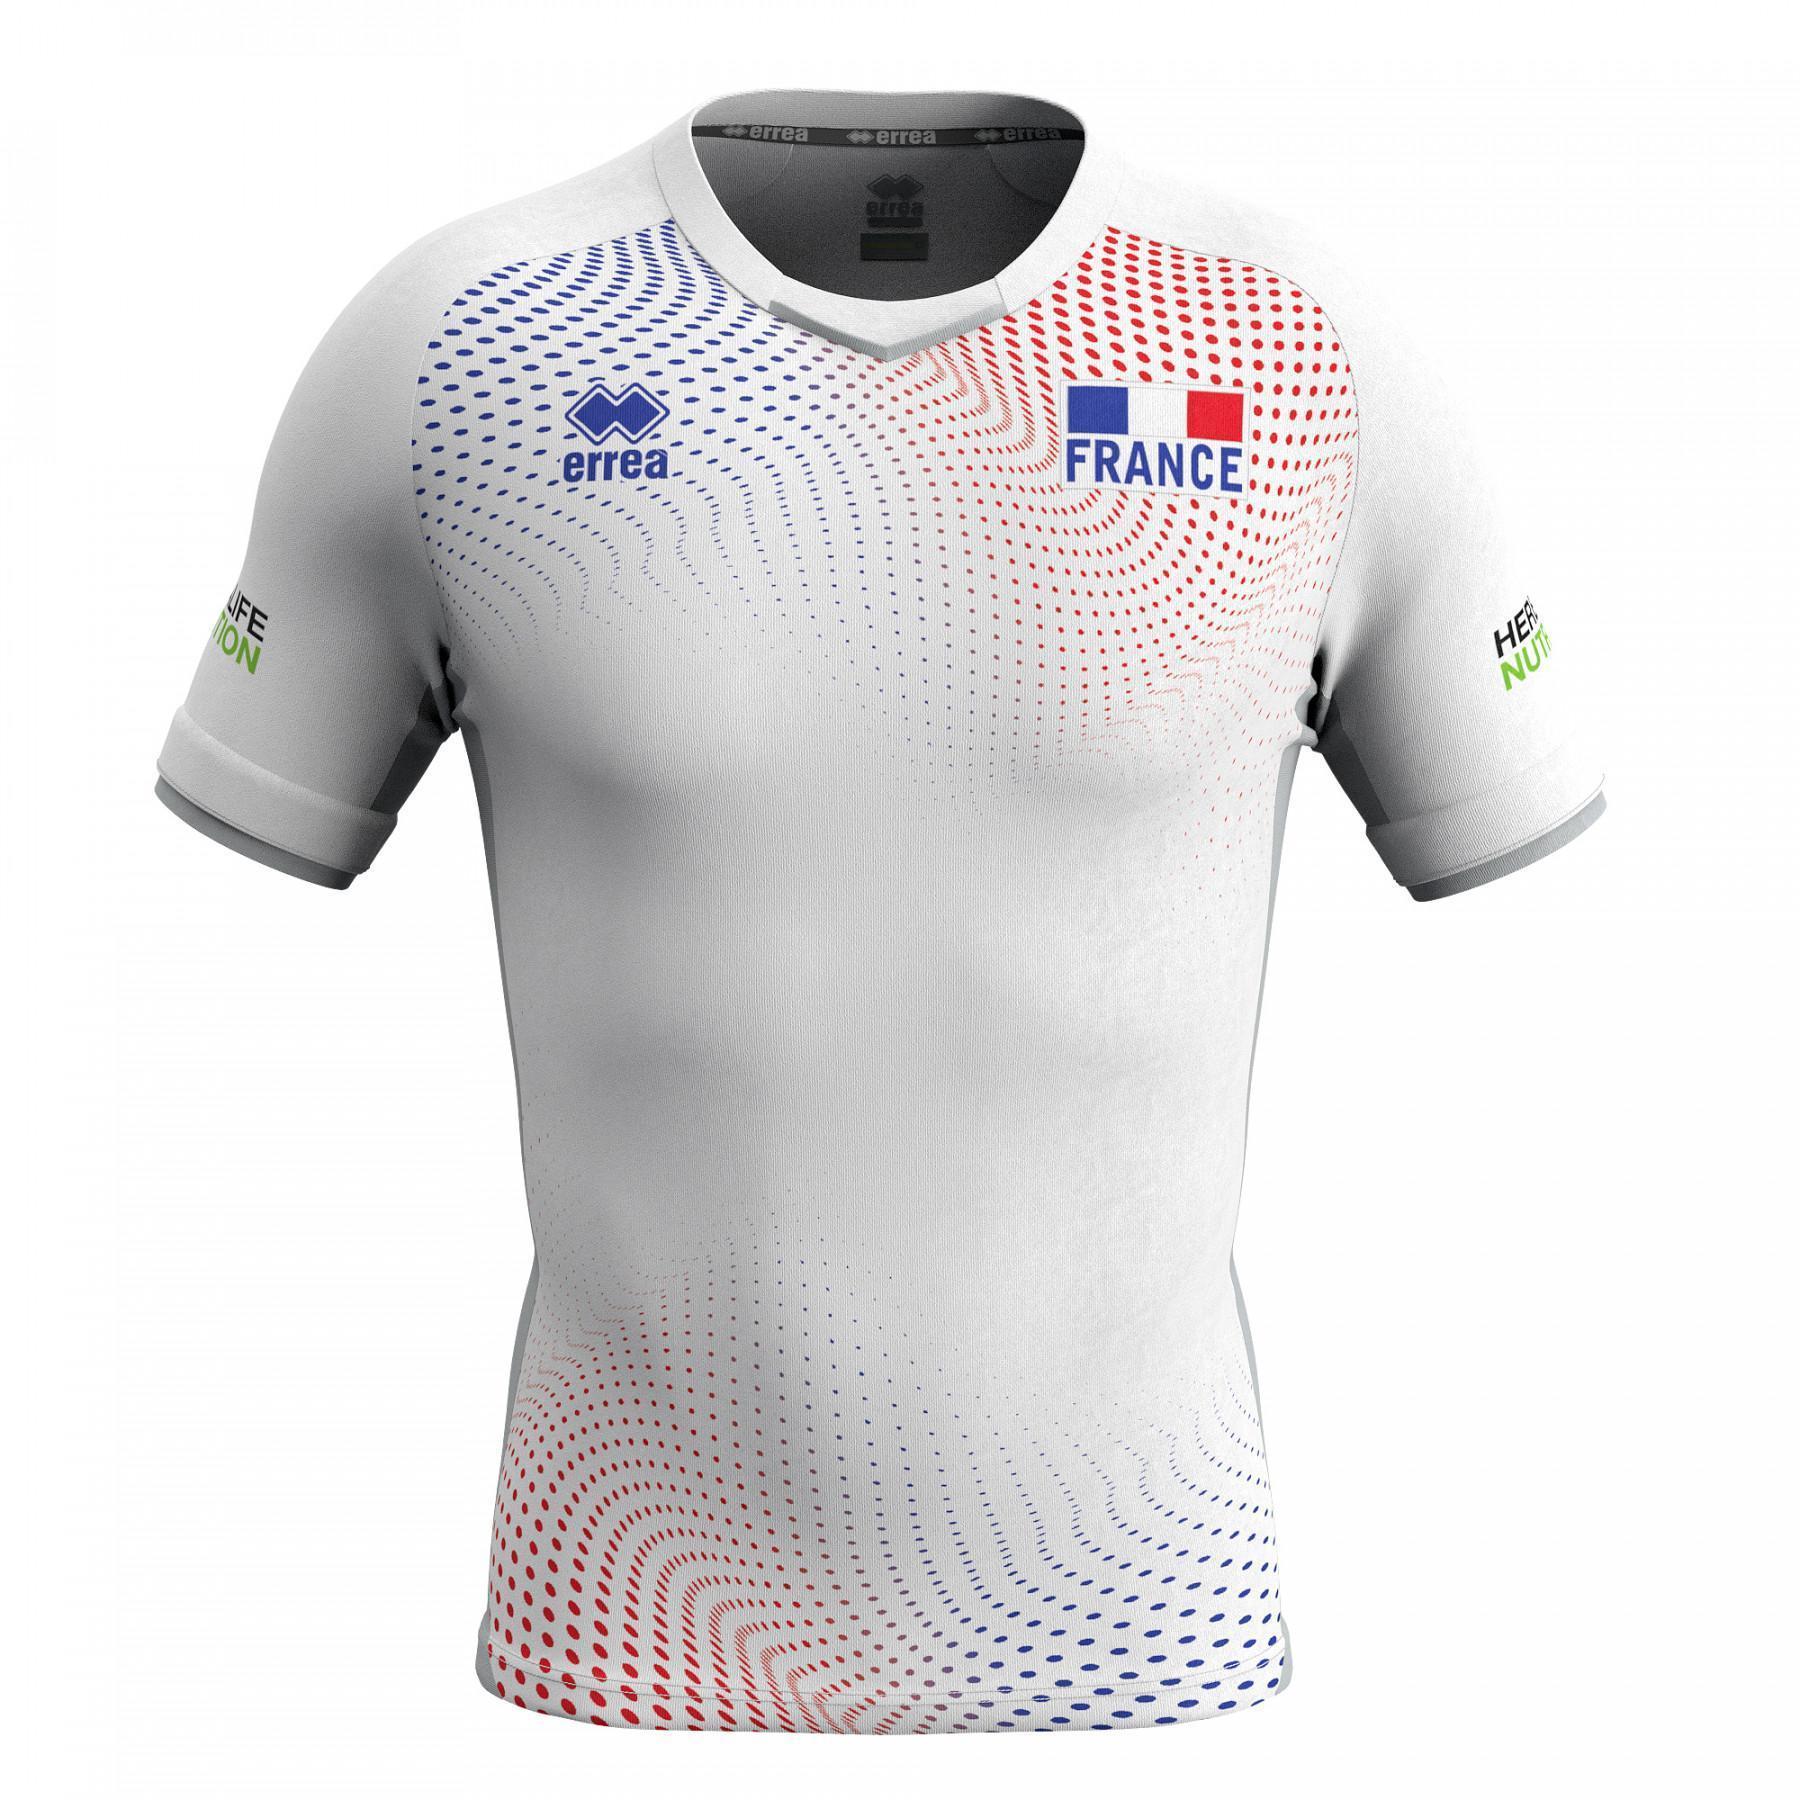 https://media.direct-volley.fr/catalog/product/cache/image/1800x/9df78eab33525d08d6e5fb8d27136e95/f/r/francia_man_2_herbalife_front.jpg